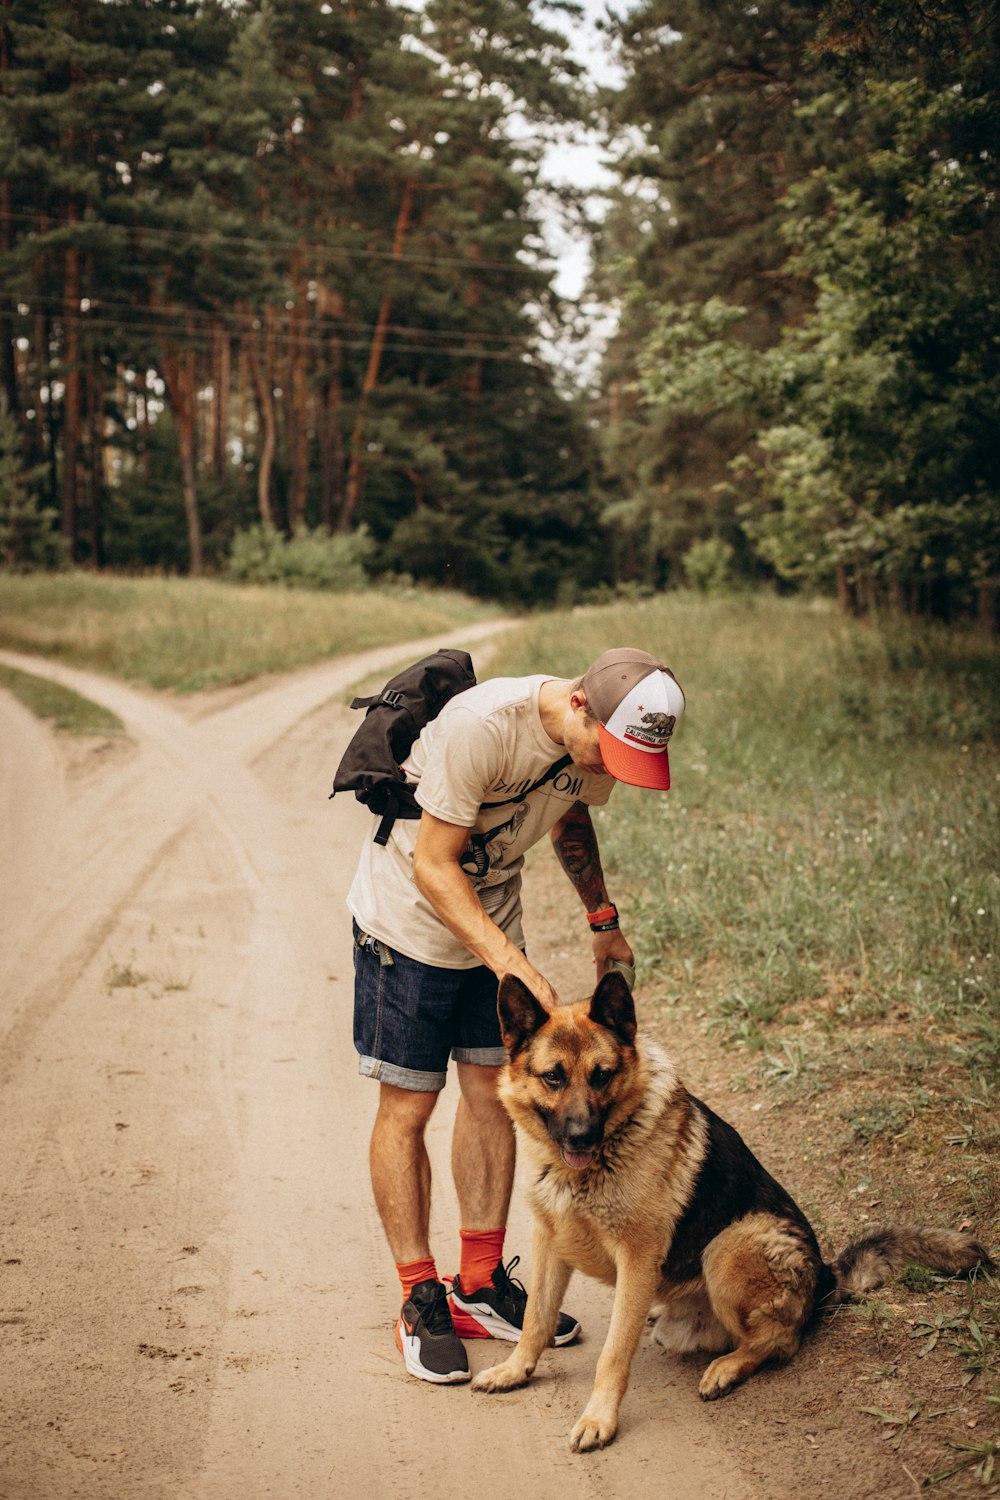 a man petting a dog on a dirt road